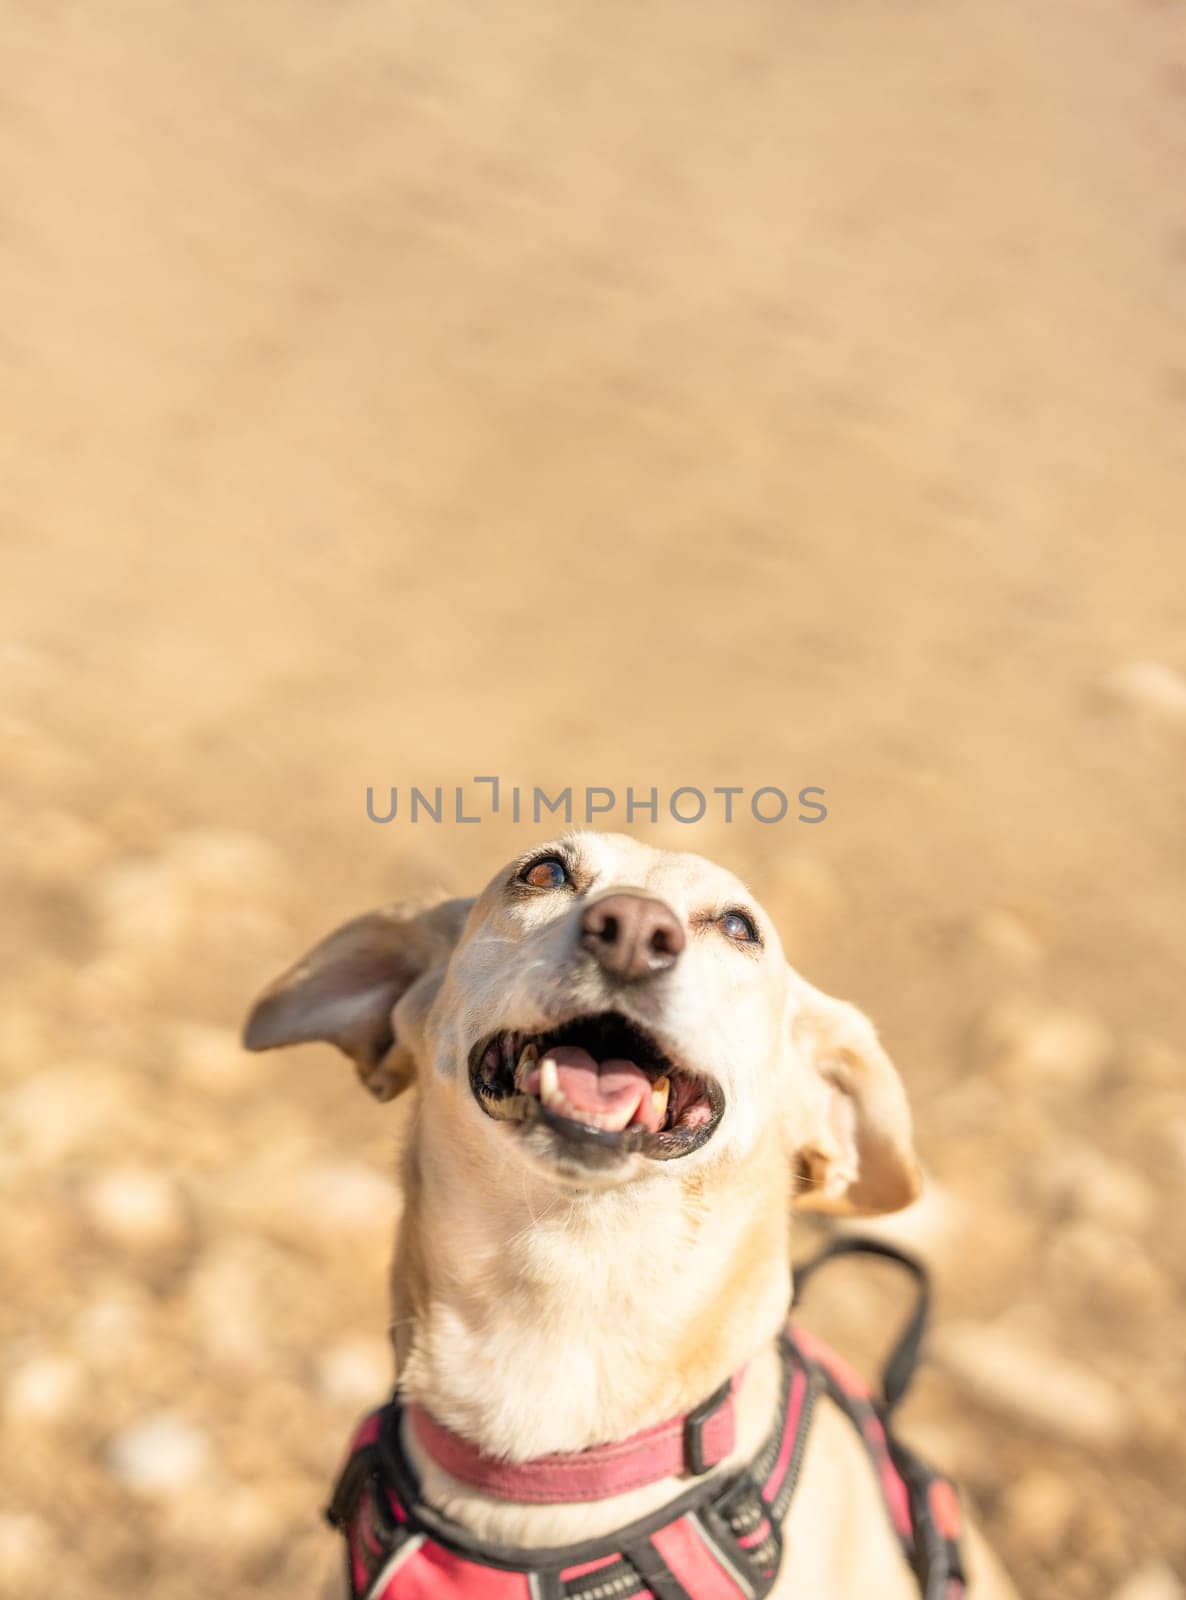 Vertical portrait with copy space and focus on a cute small dog looking up in a park